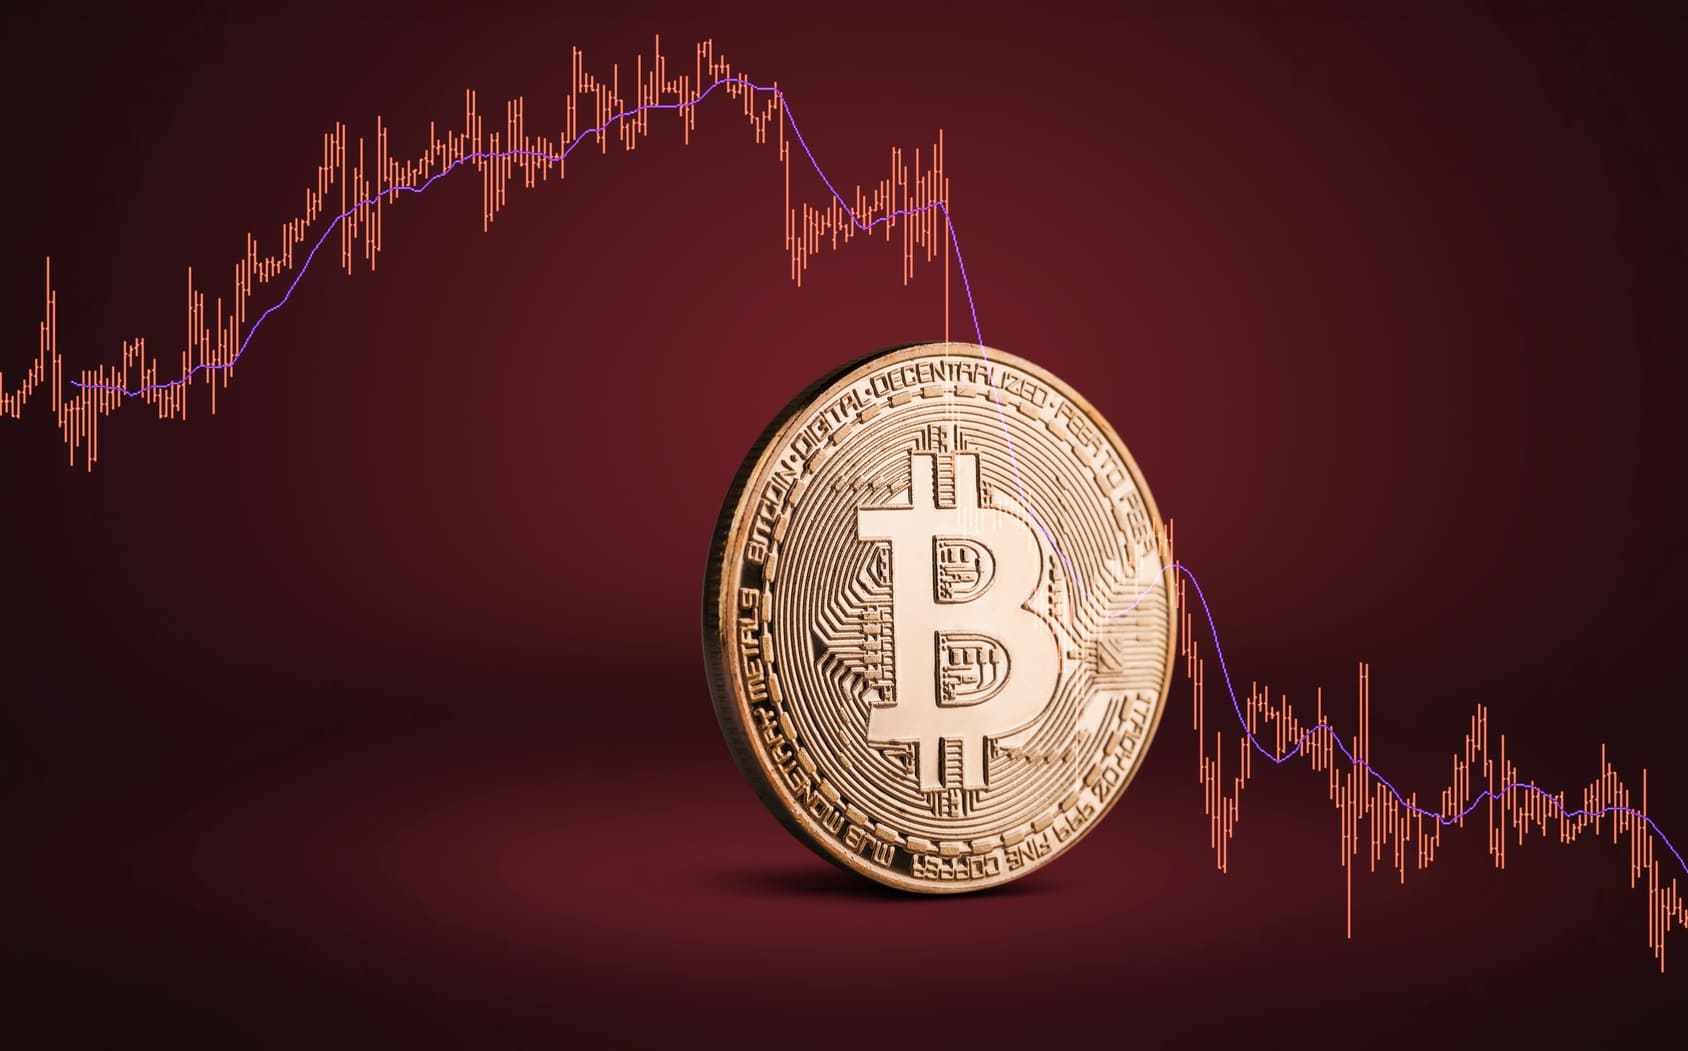 Bitcoin and other cryptocurrencies price tumbled again